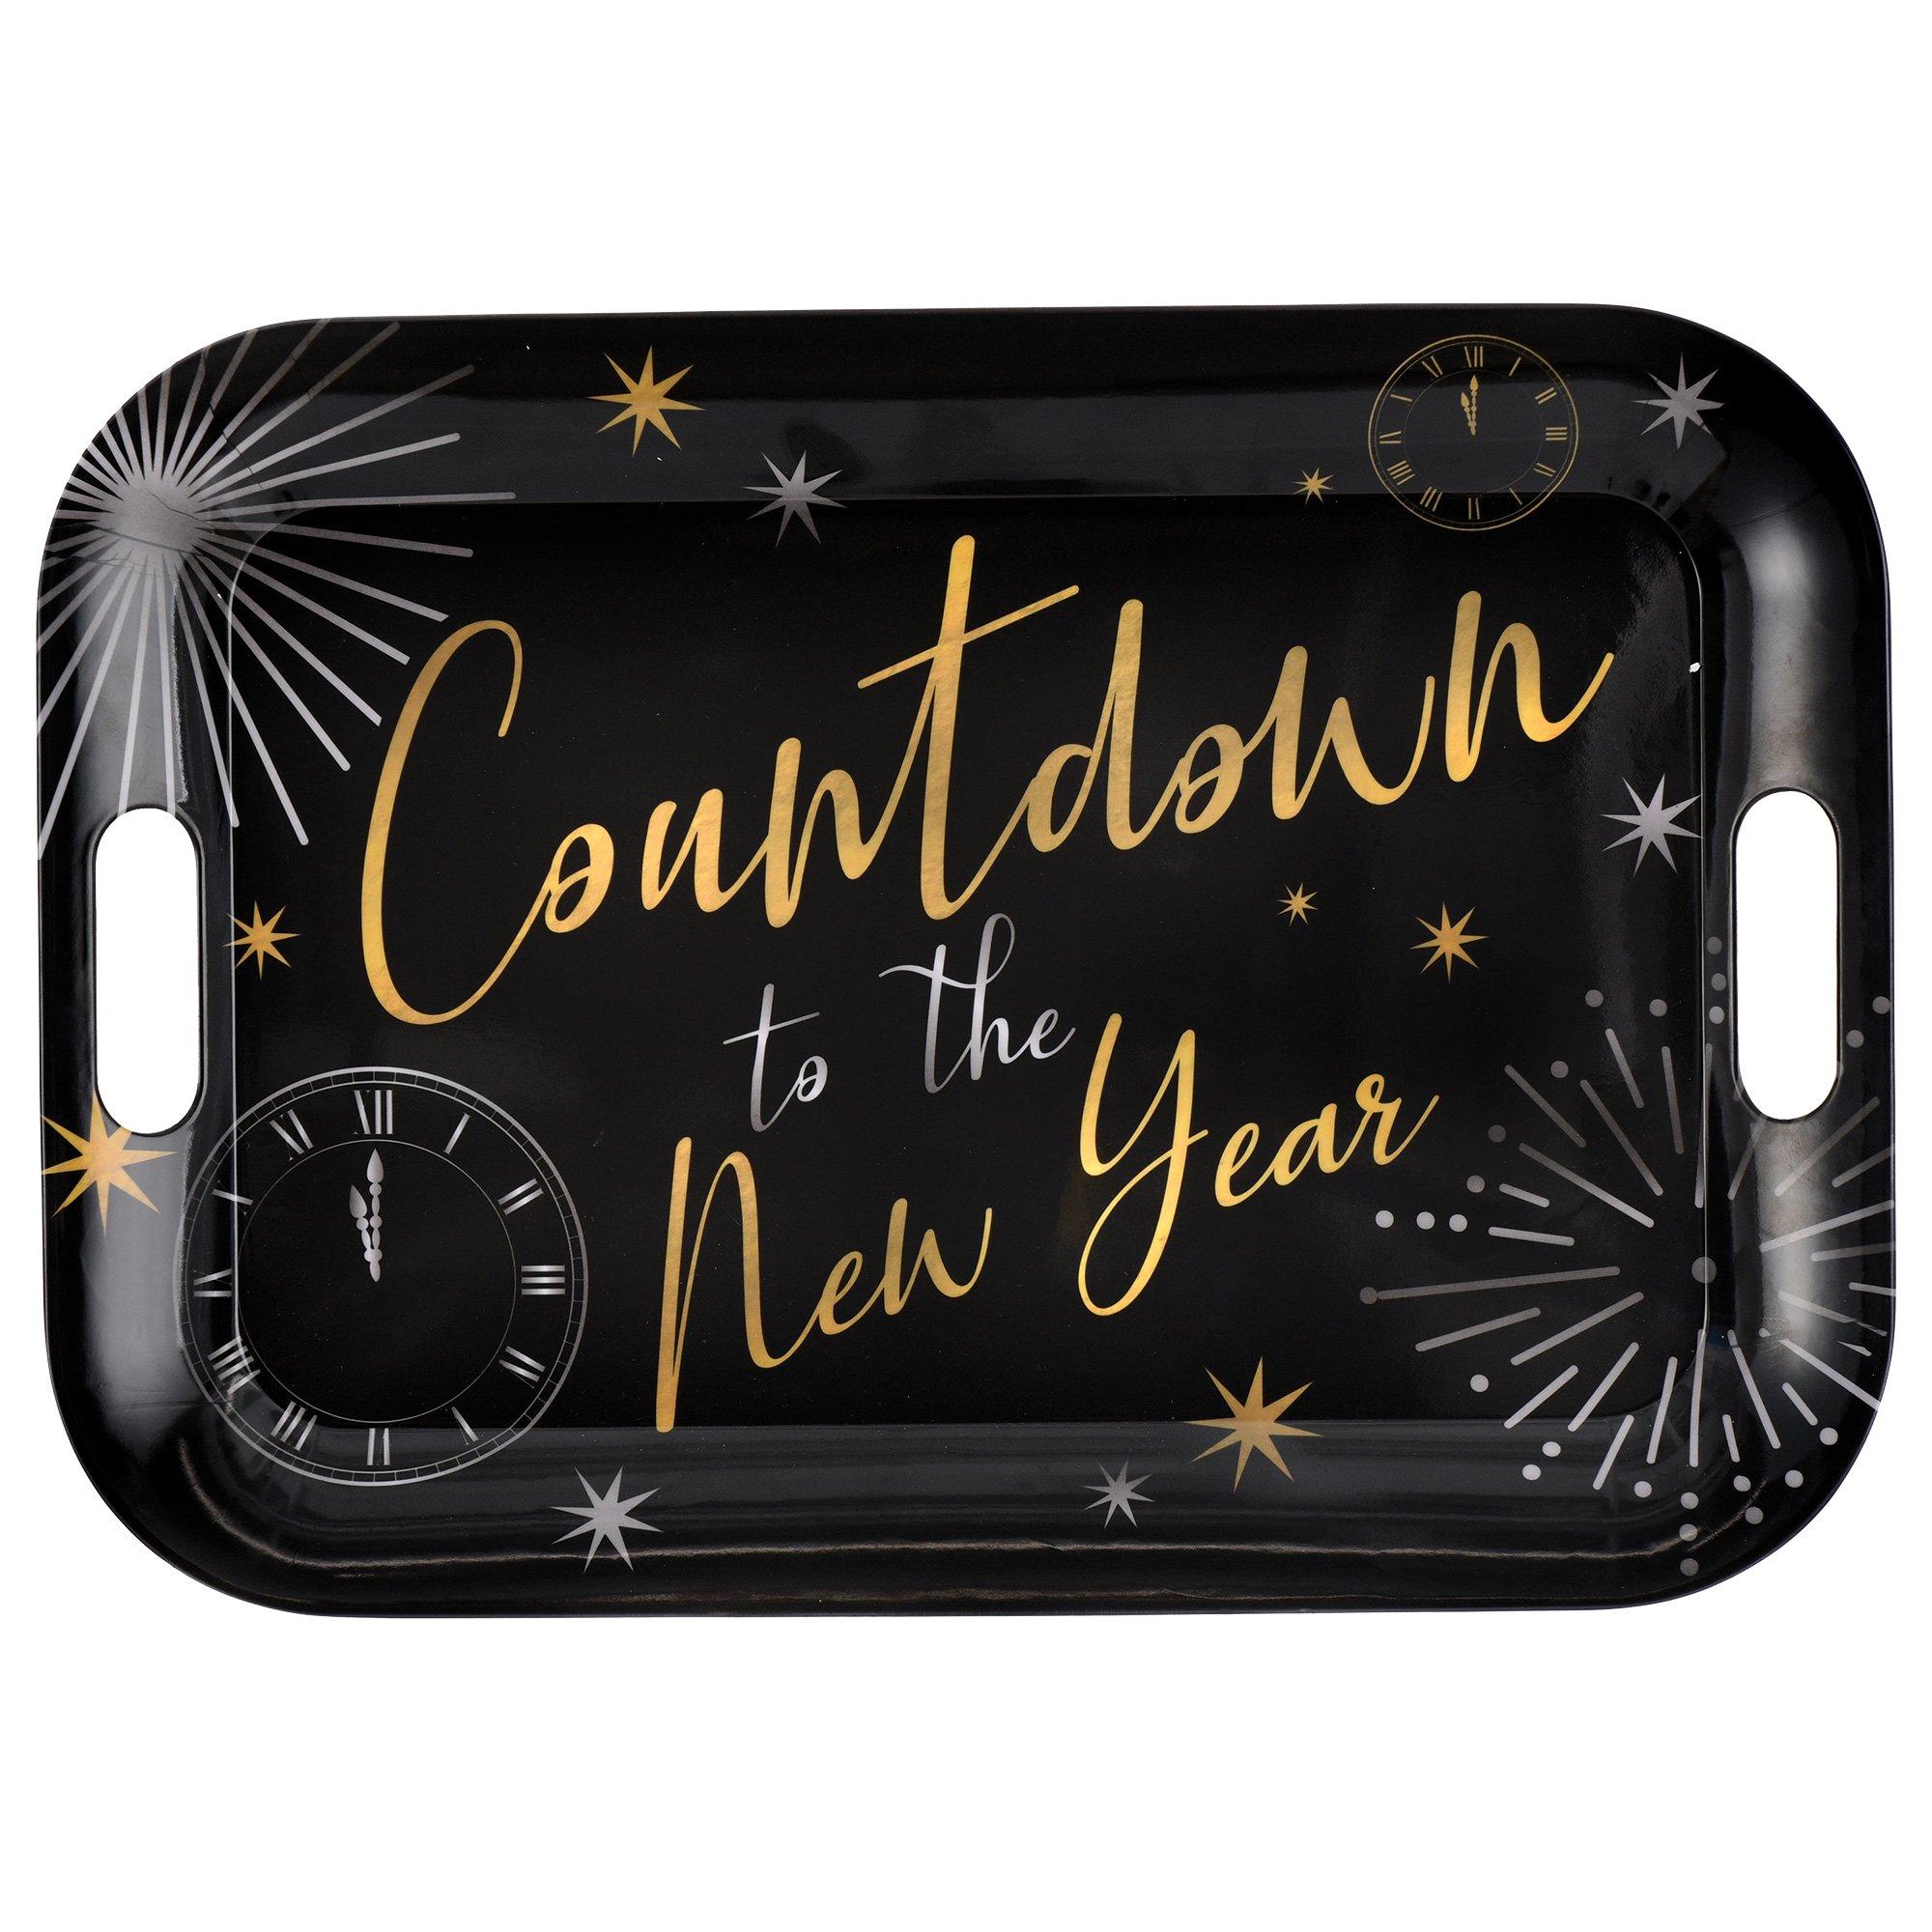 New Year's Countdown Melamine Serving Tray, 18.5in x 13in